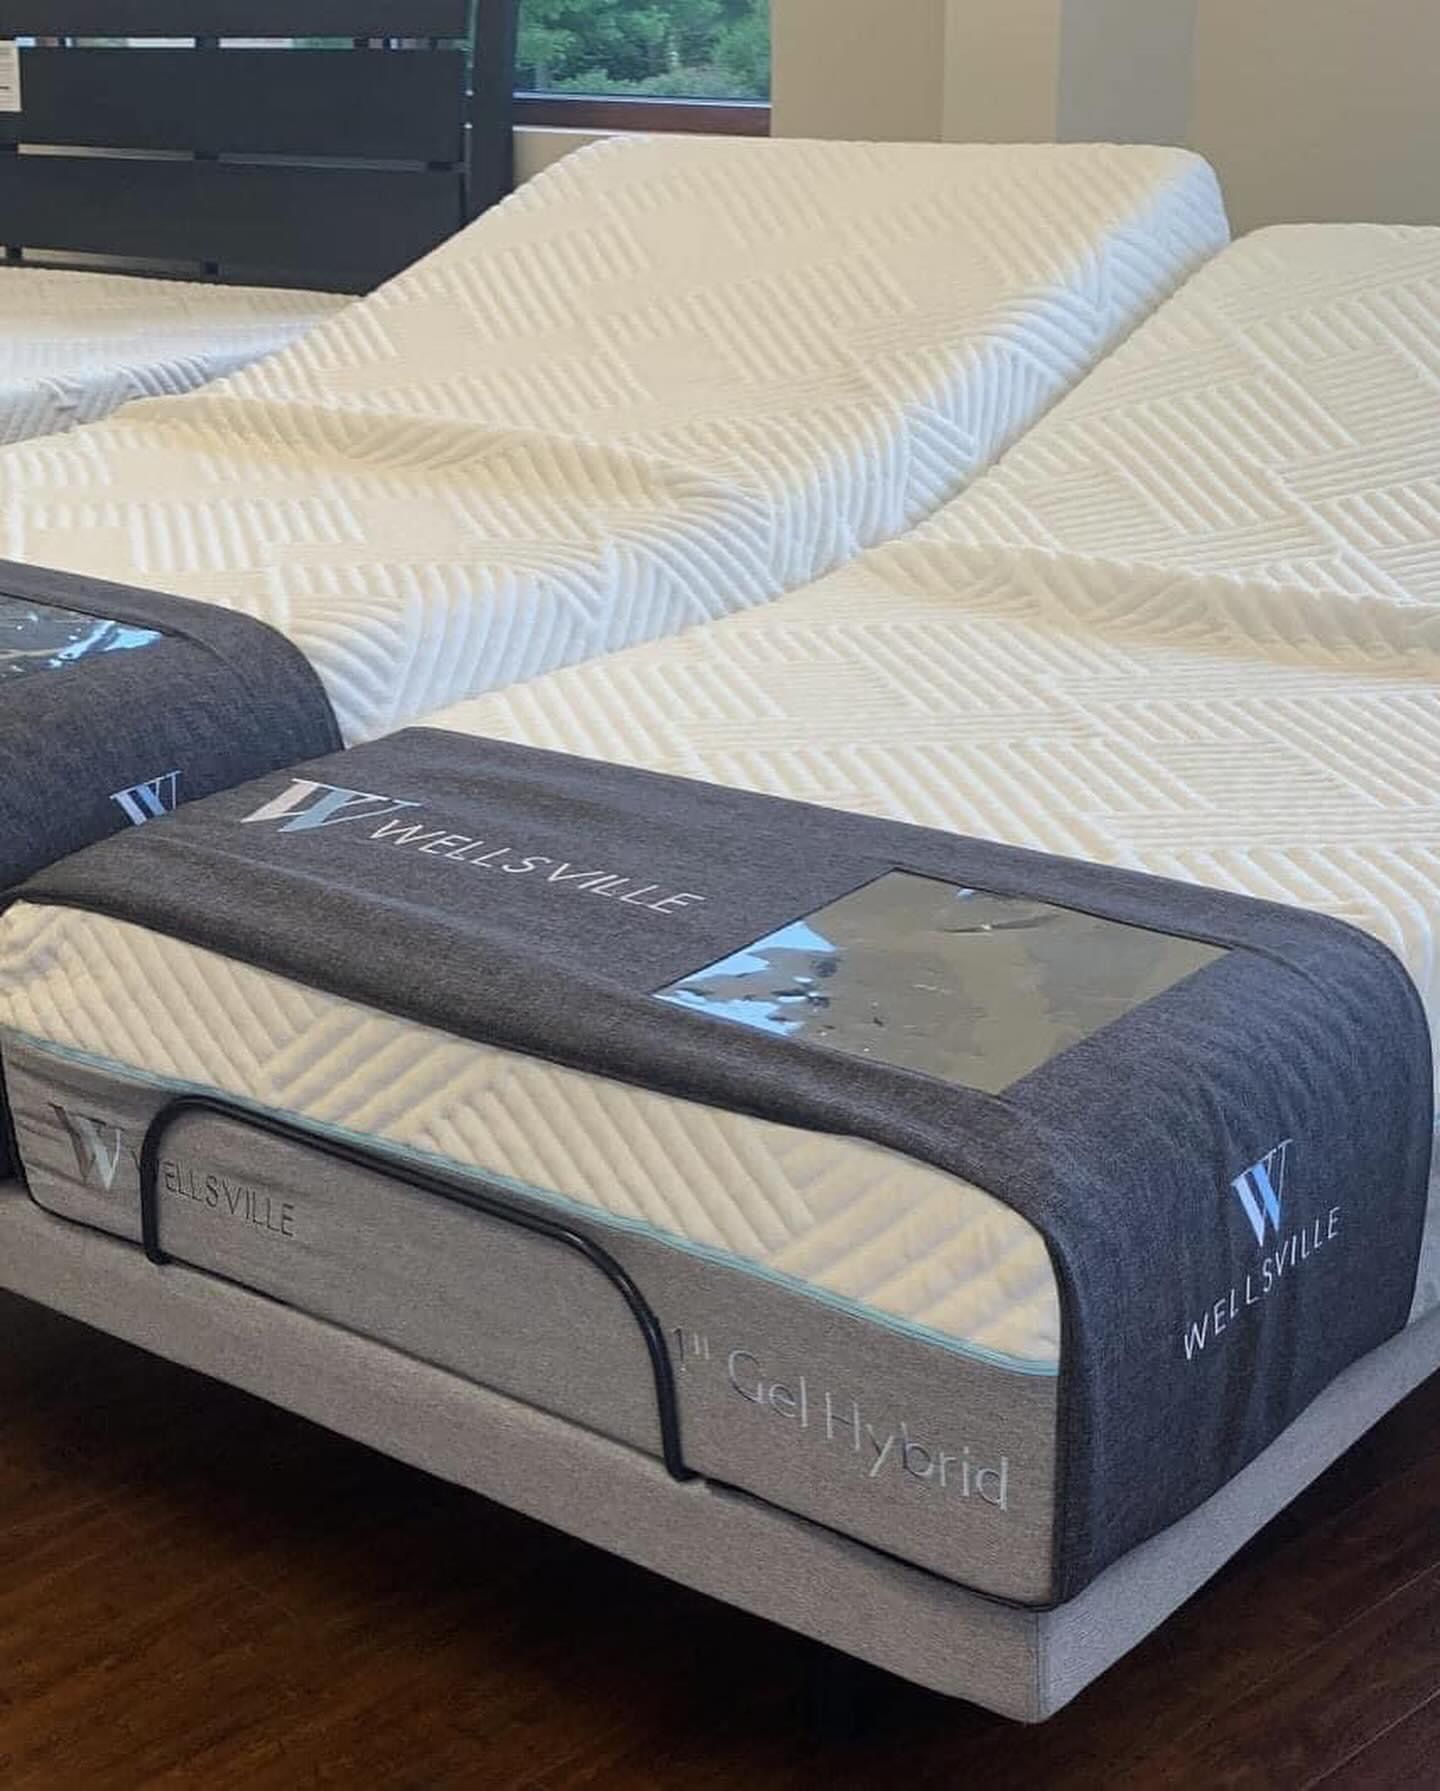 Adjustable Base Packages With Mattress!! Queen And King Brand New!!